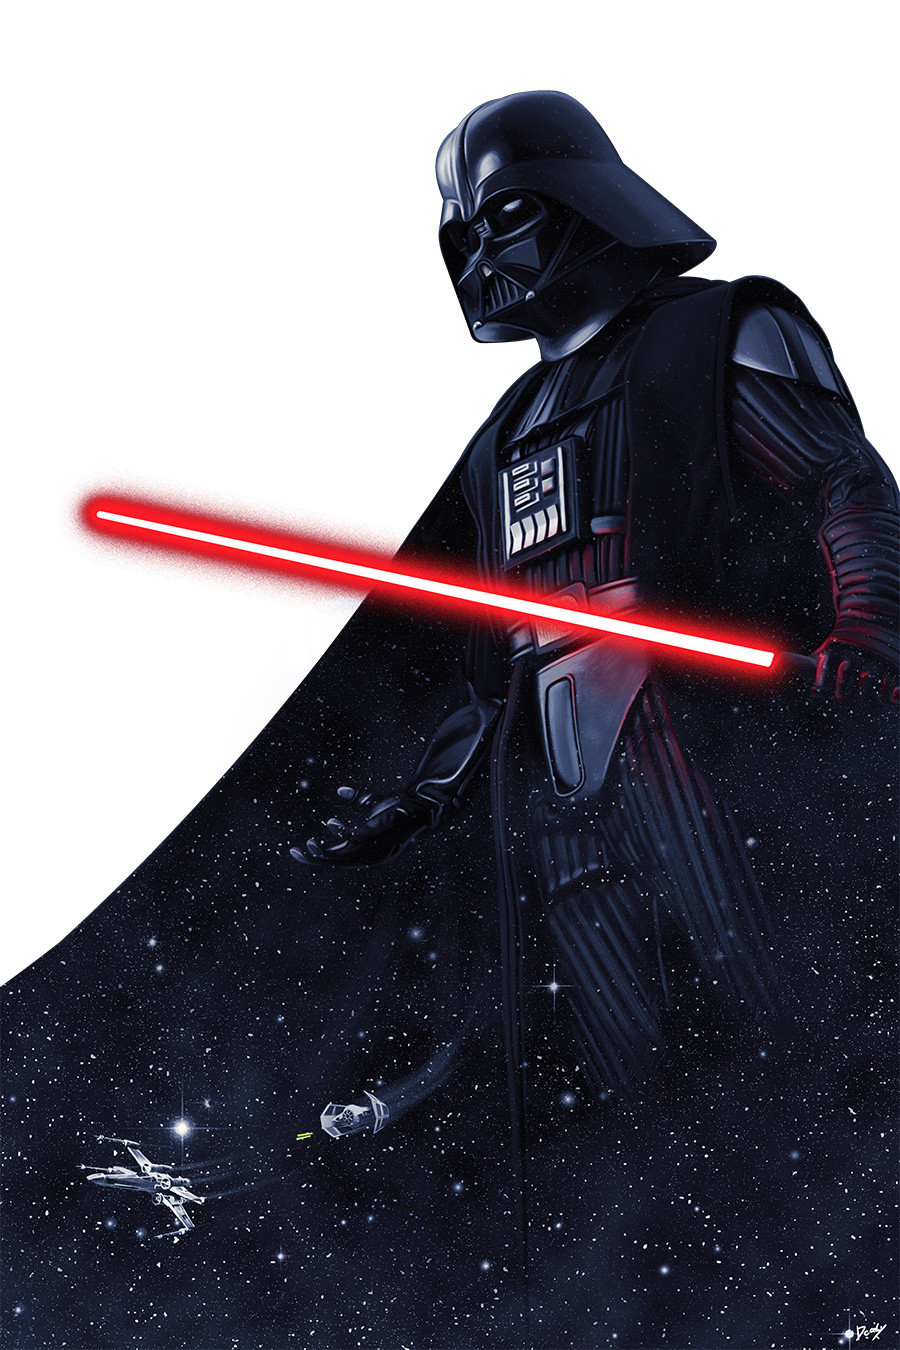 The Dark Side of the Force by Doaly